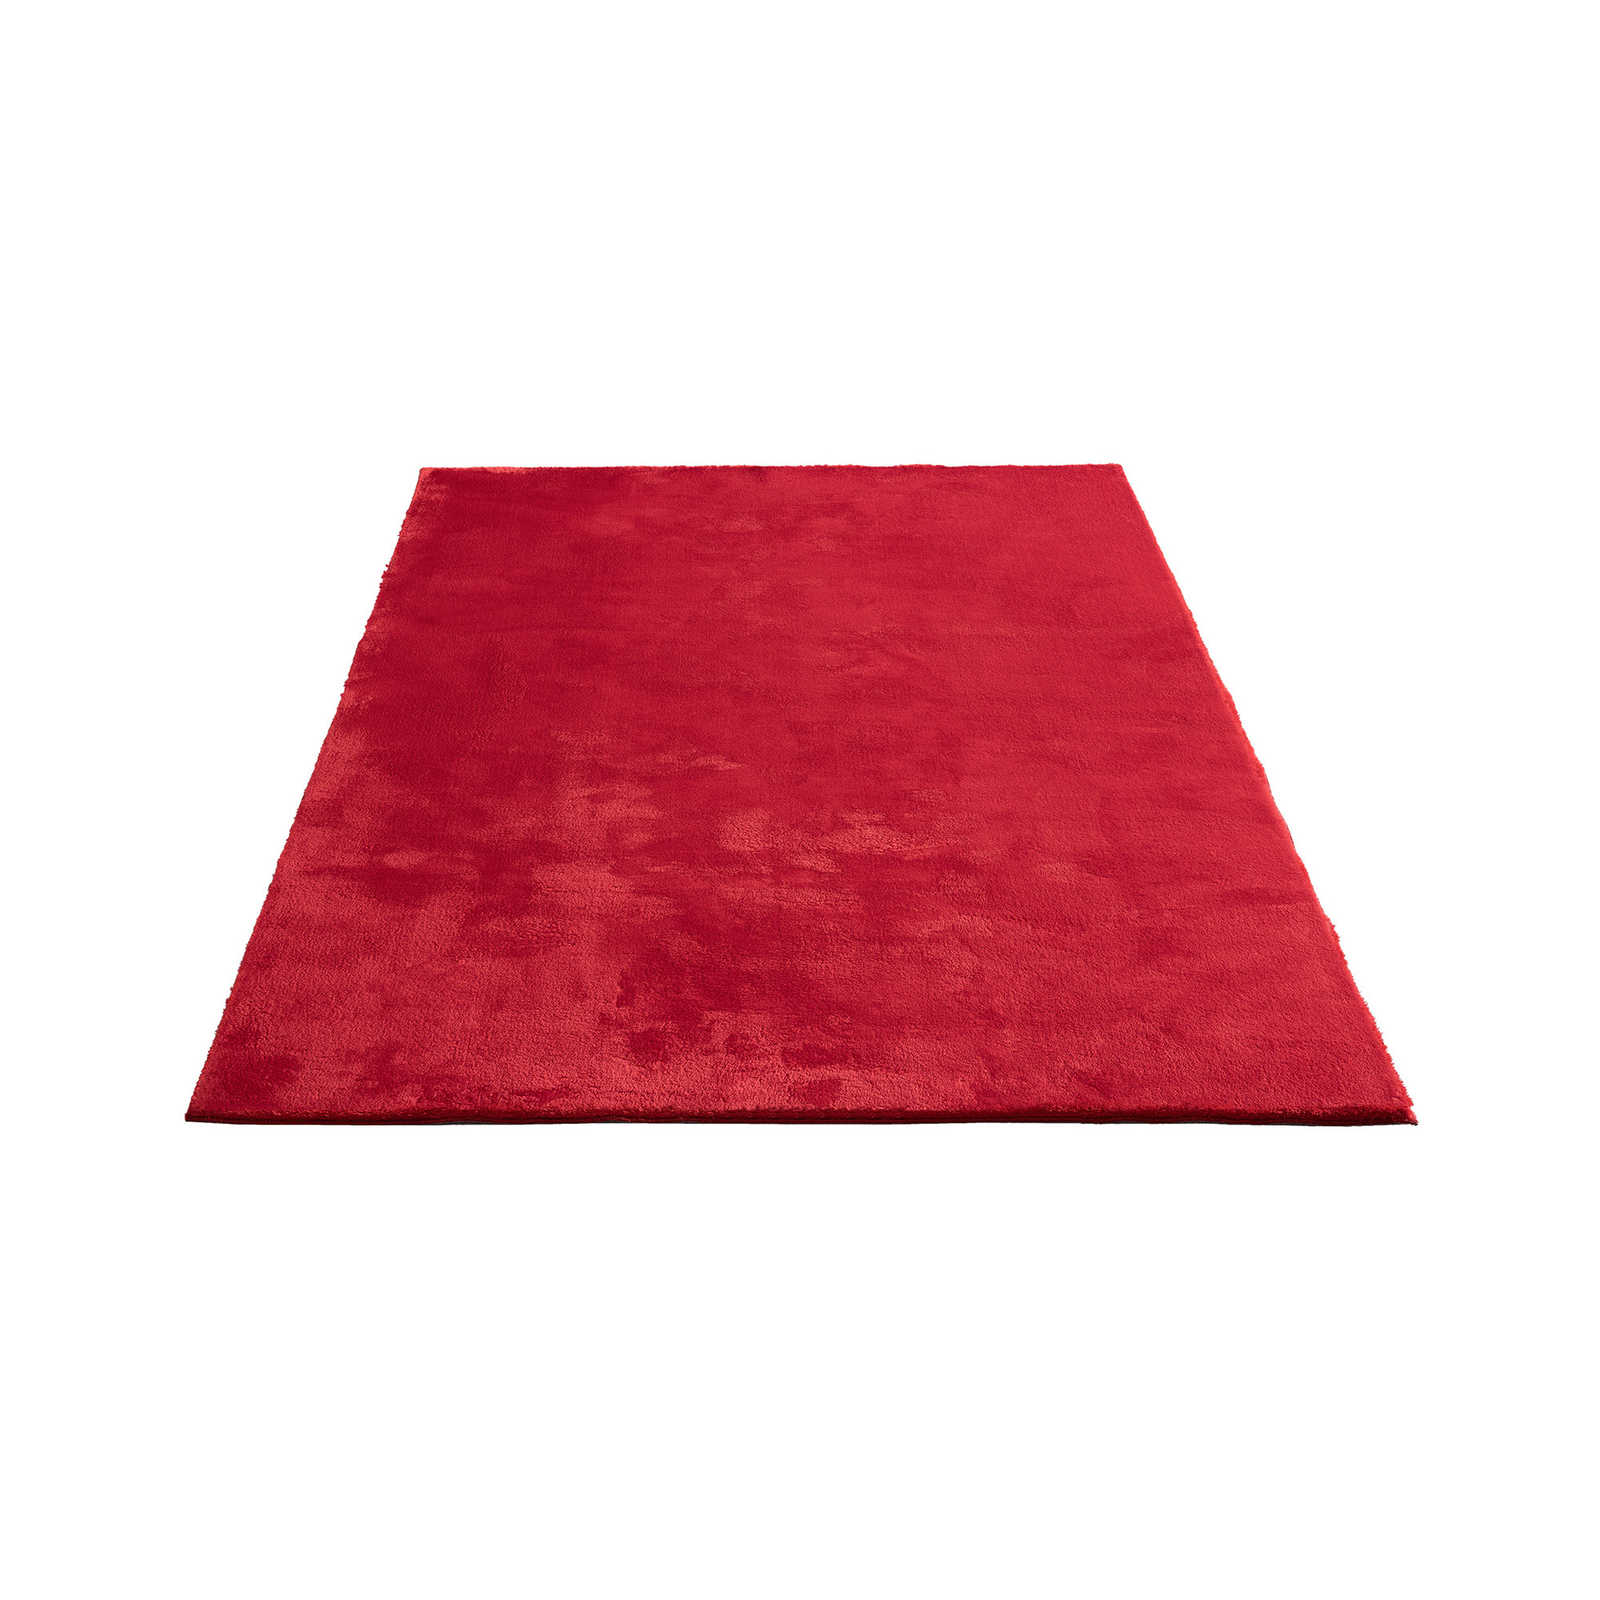 Extra soft high pile carpet in red - 230 x 160 cm
